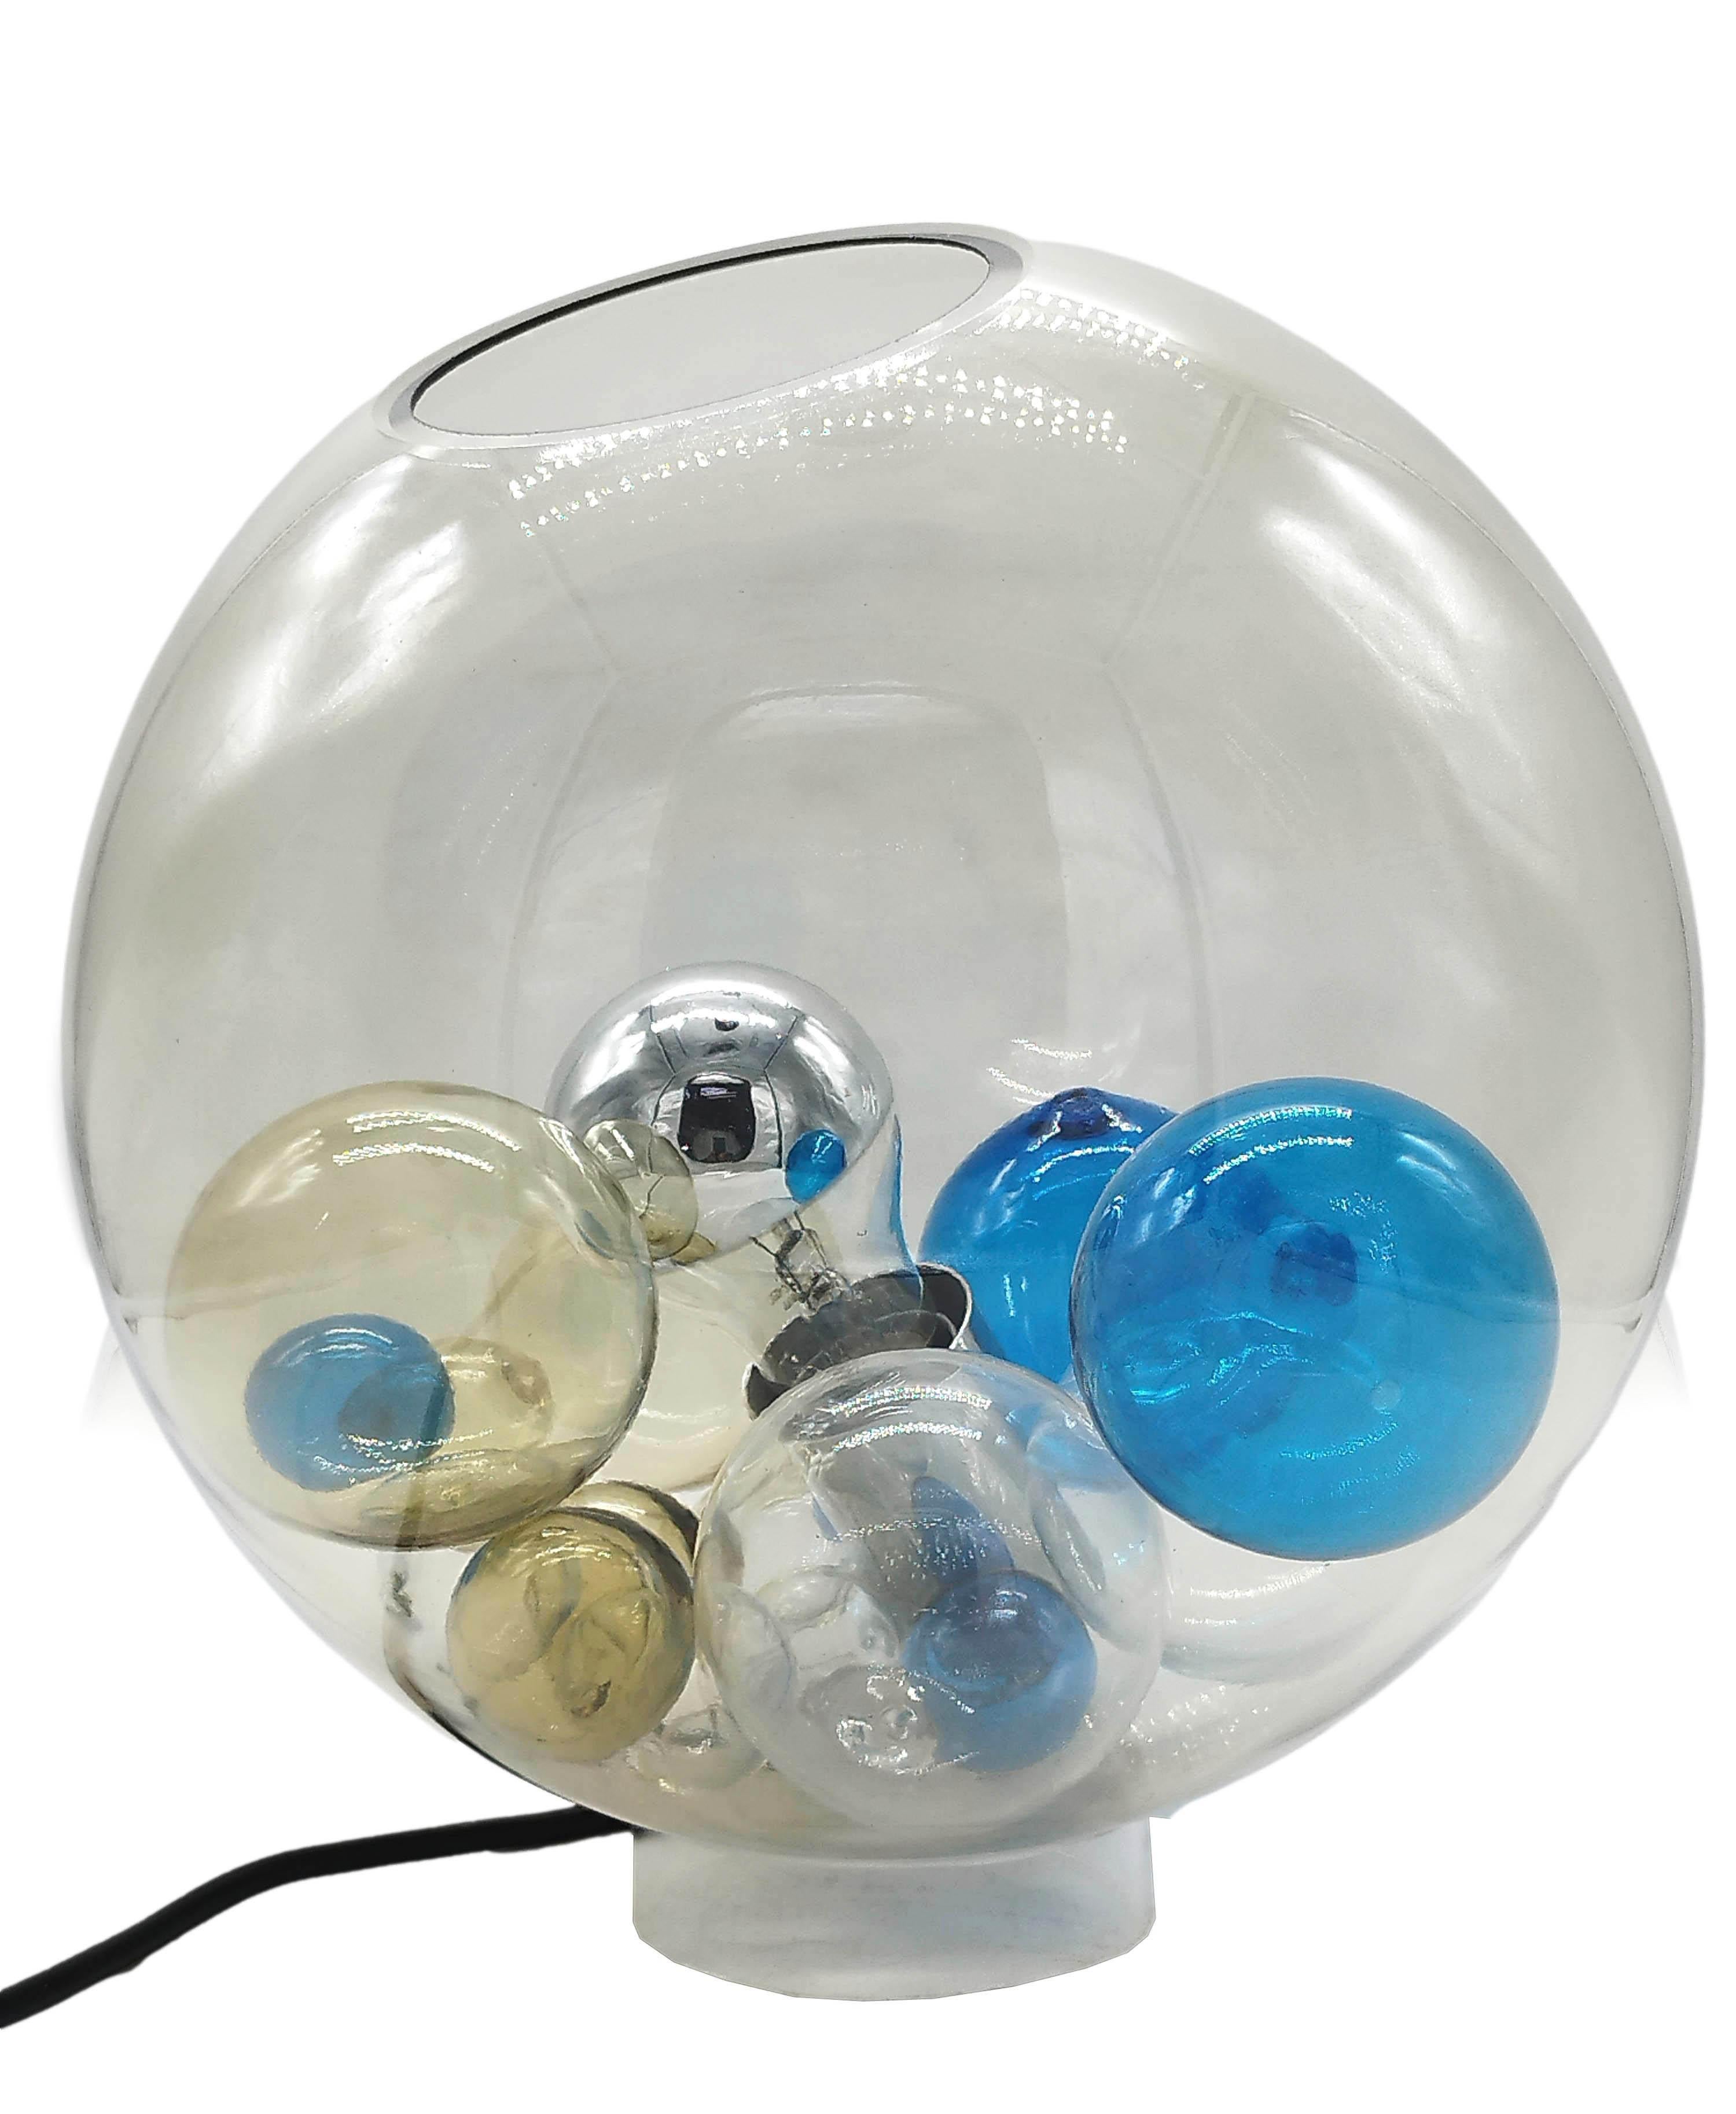 Rare table lamp, Pallotta model. Designed and made by Studio Venini, circa 1970. This design consists of a transparent smoked globe made of glass. Inside the lamp are several polychrome spheres in blue,light blue and white transparent. The Palotta